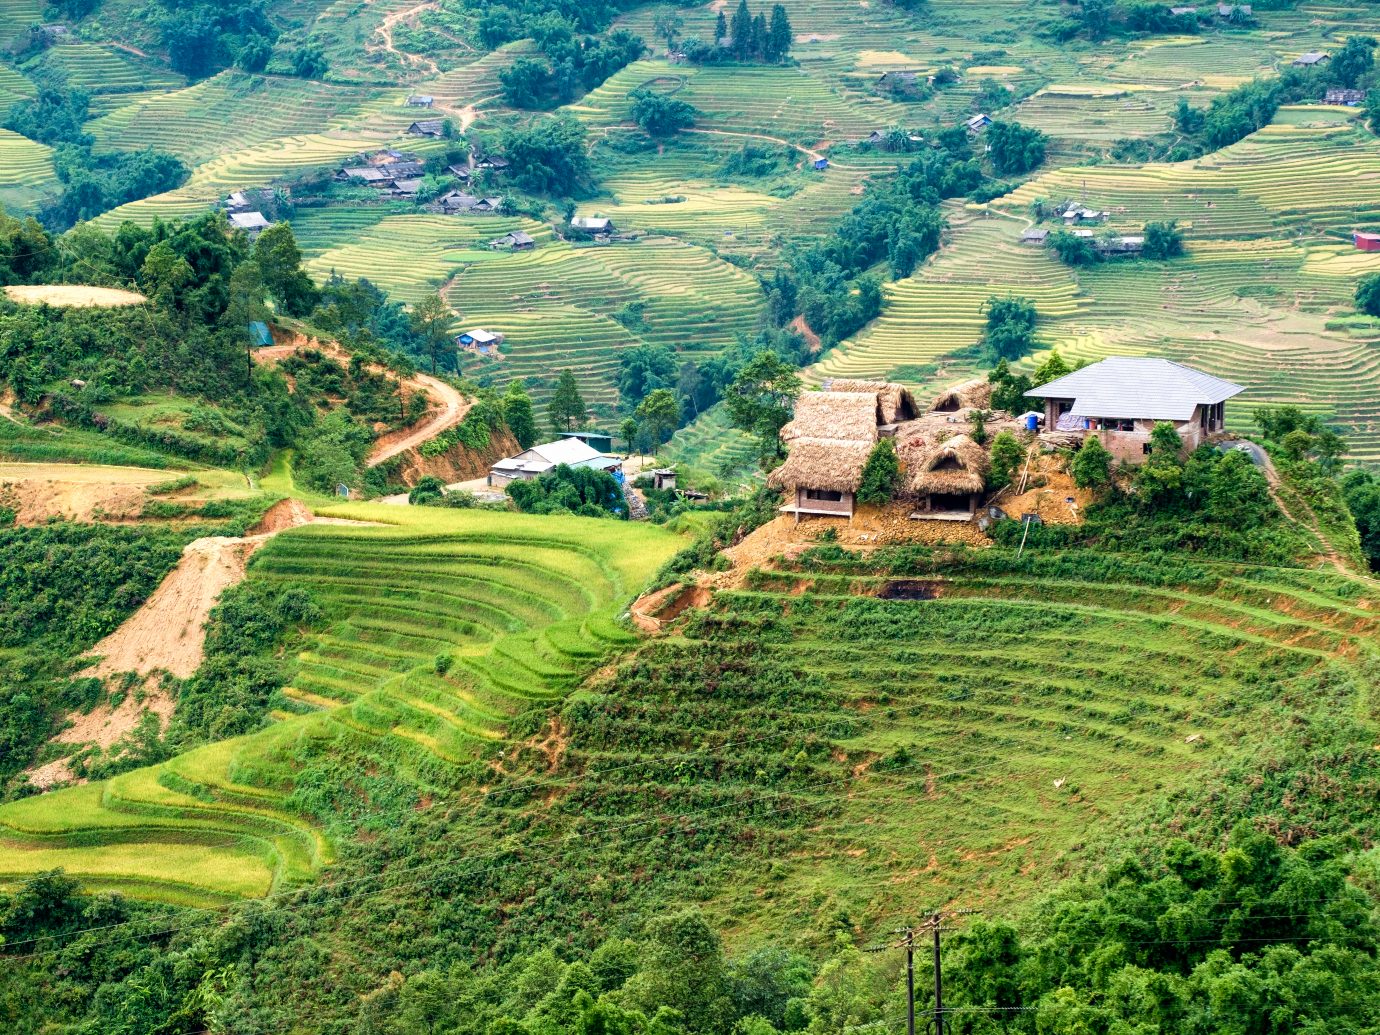 Cottage house on rice field terraced in valley